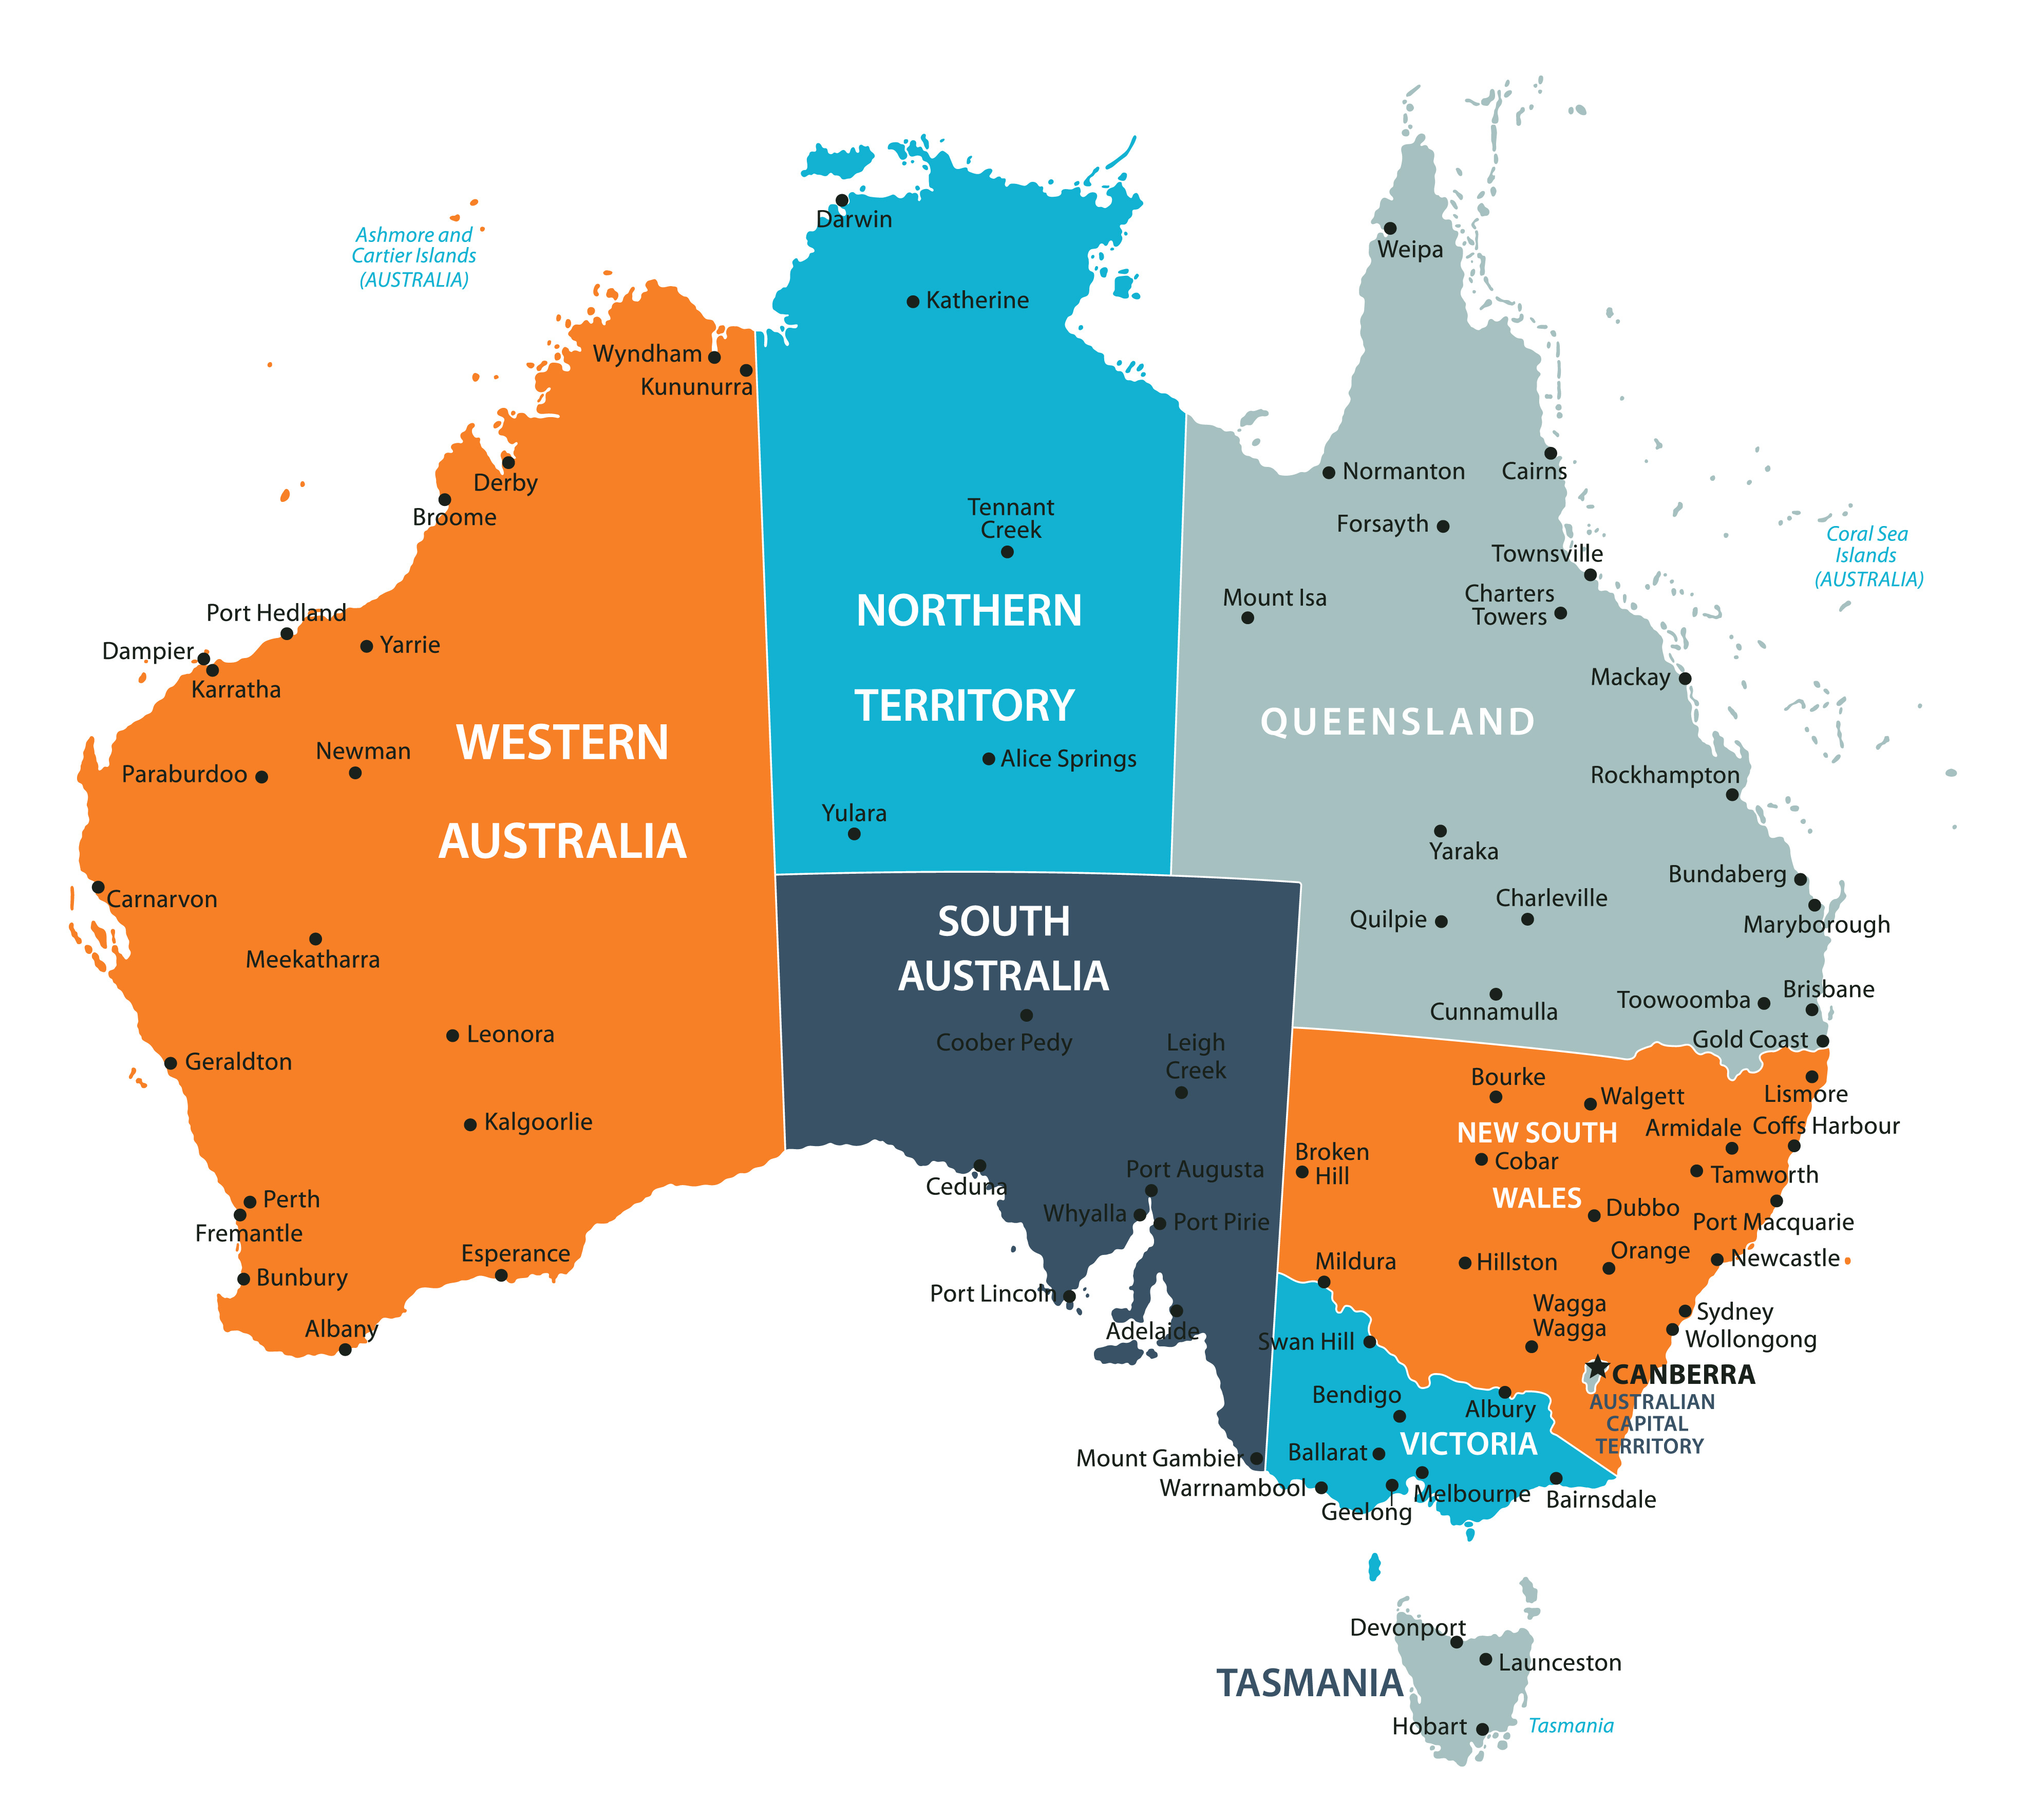 Colored map of Australia divided into states and territories with city names